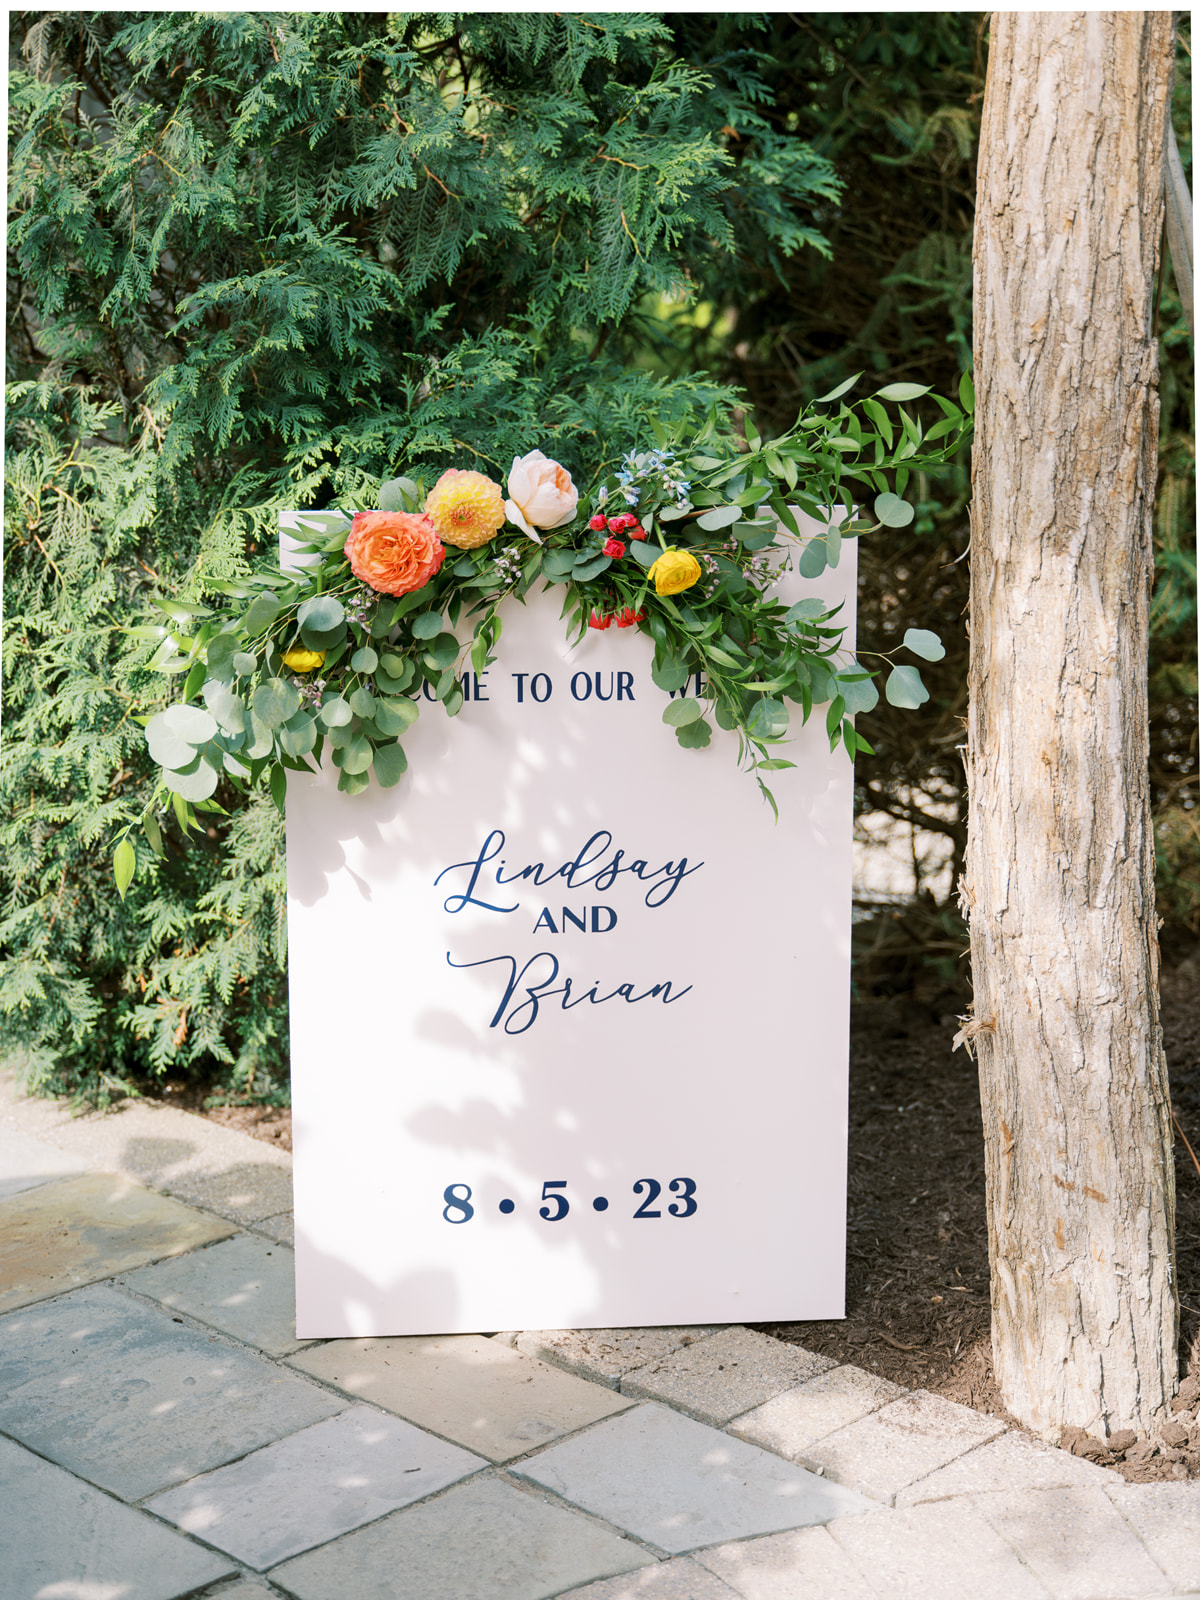 Orchid House Winery wedding welcome sign